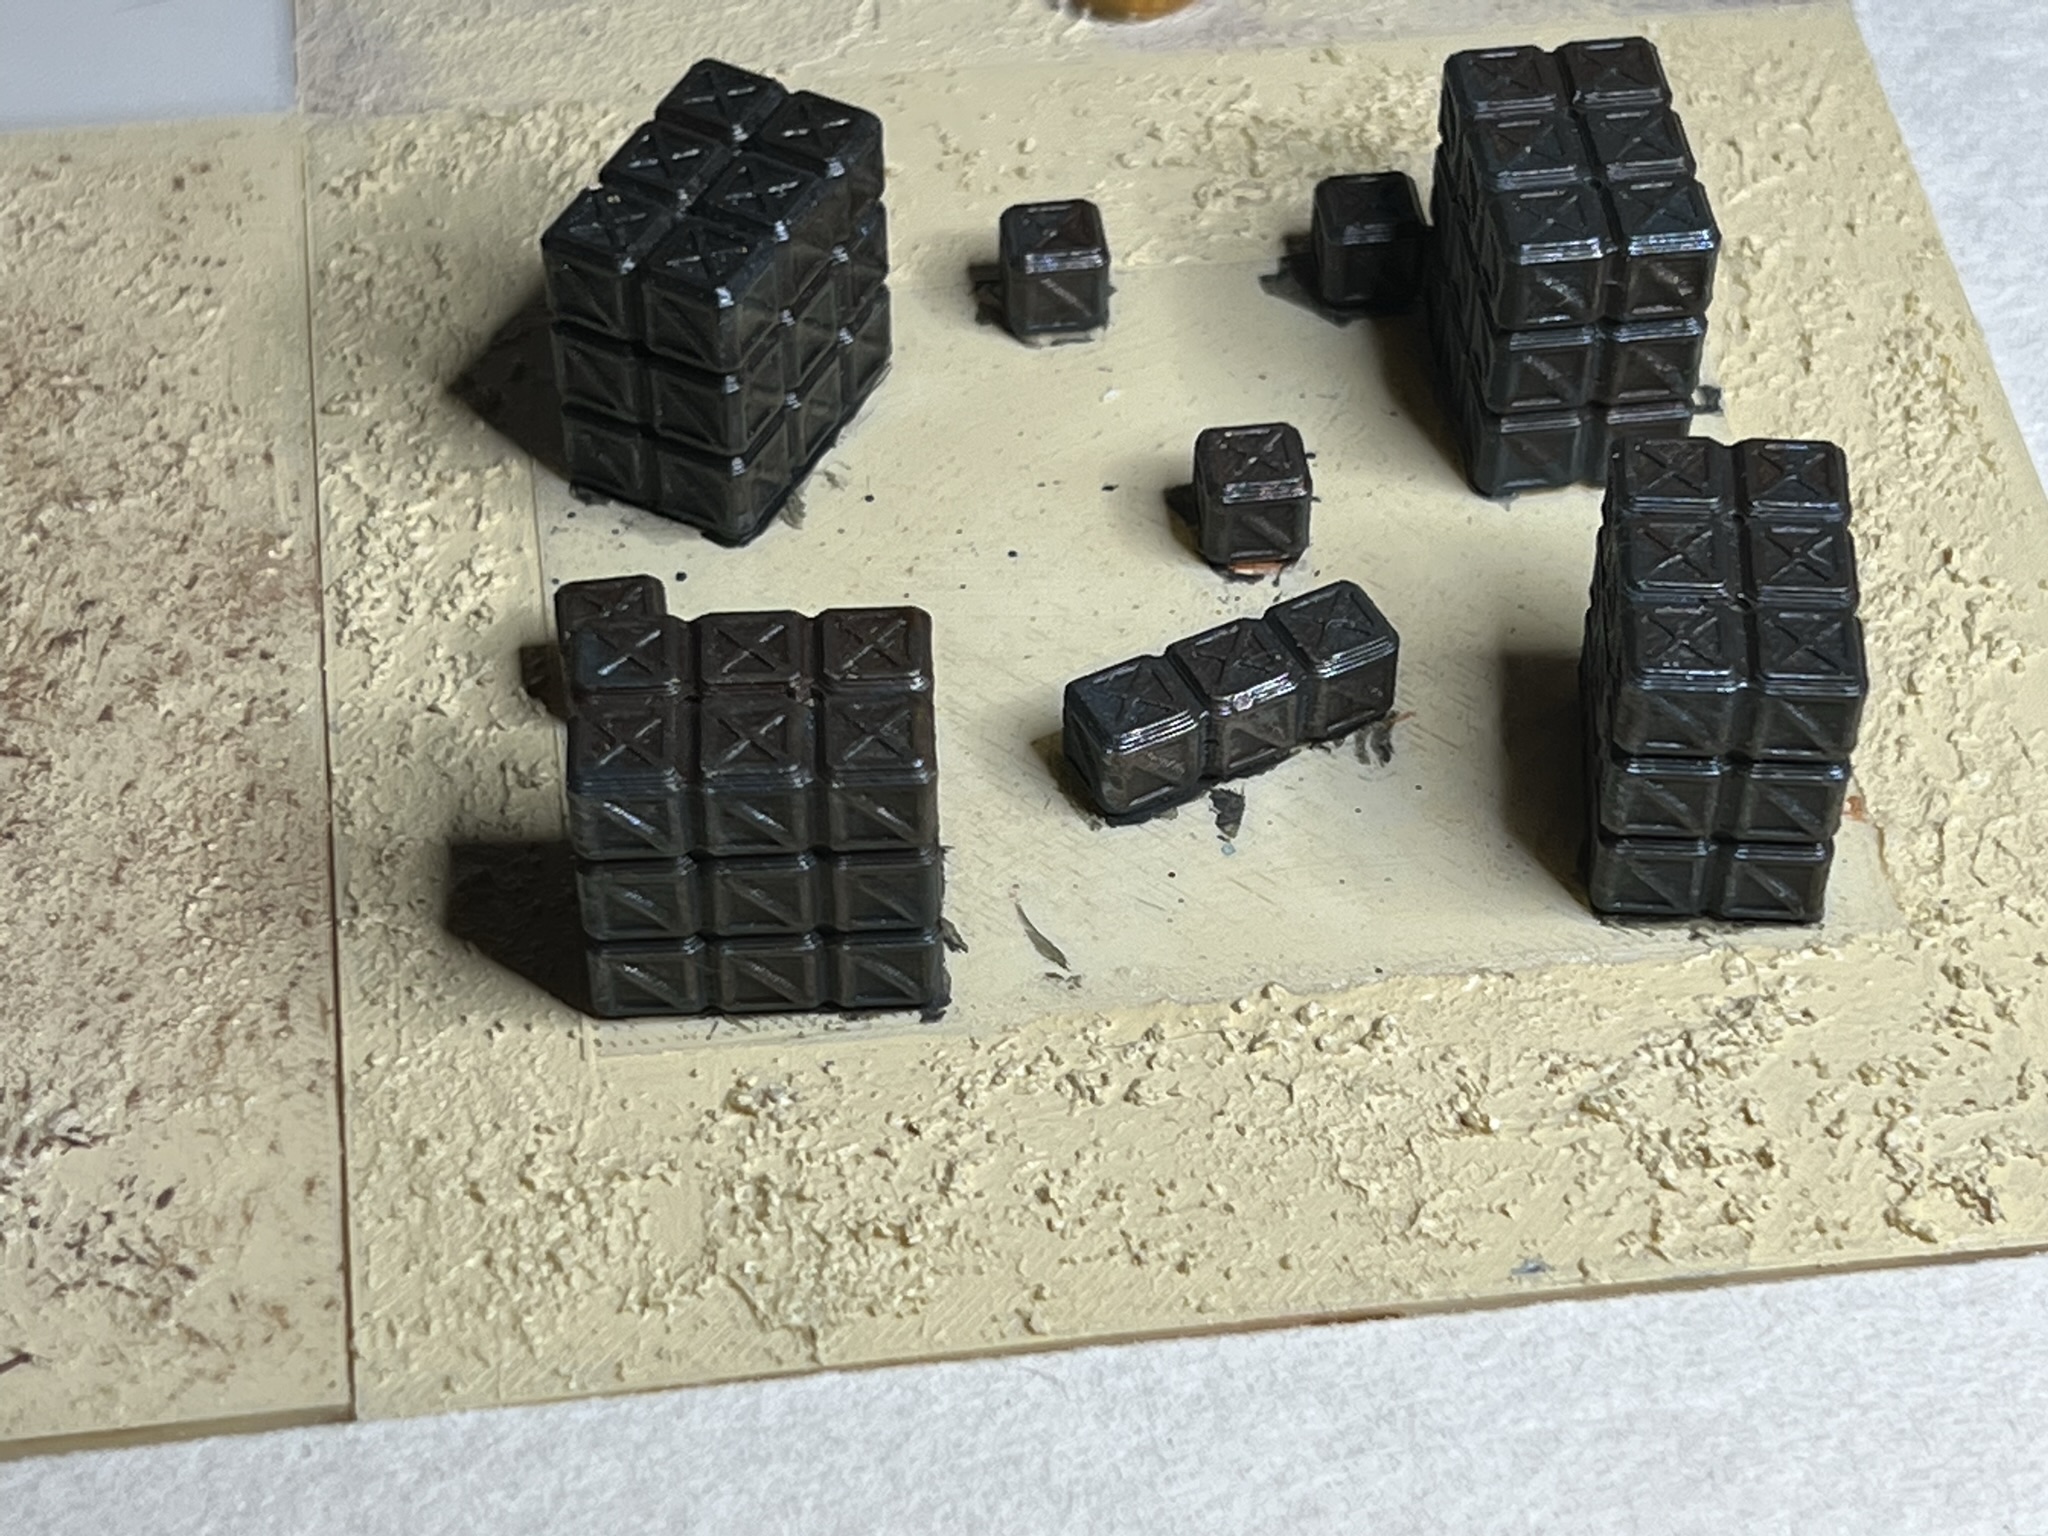 12 cm terrain tile for 6mm Wargaming - Container stacks